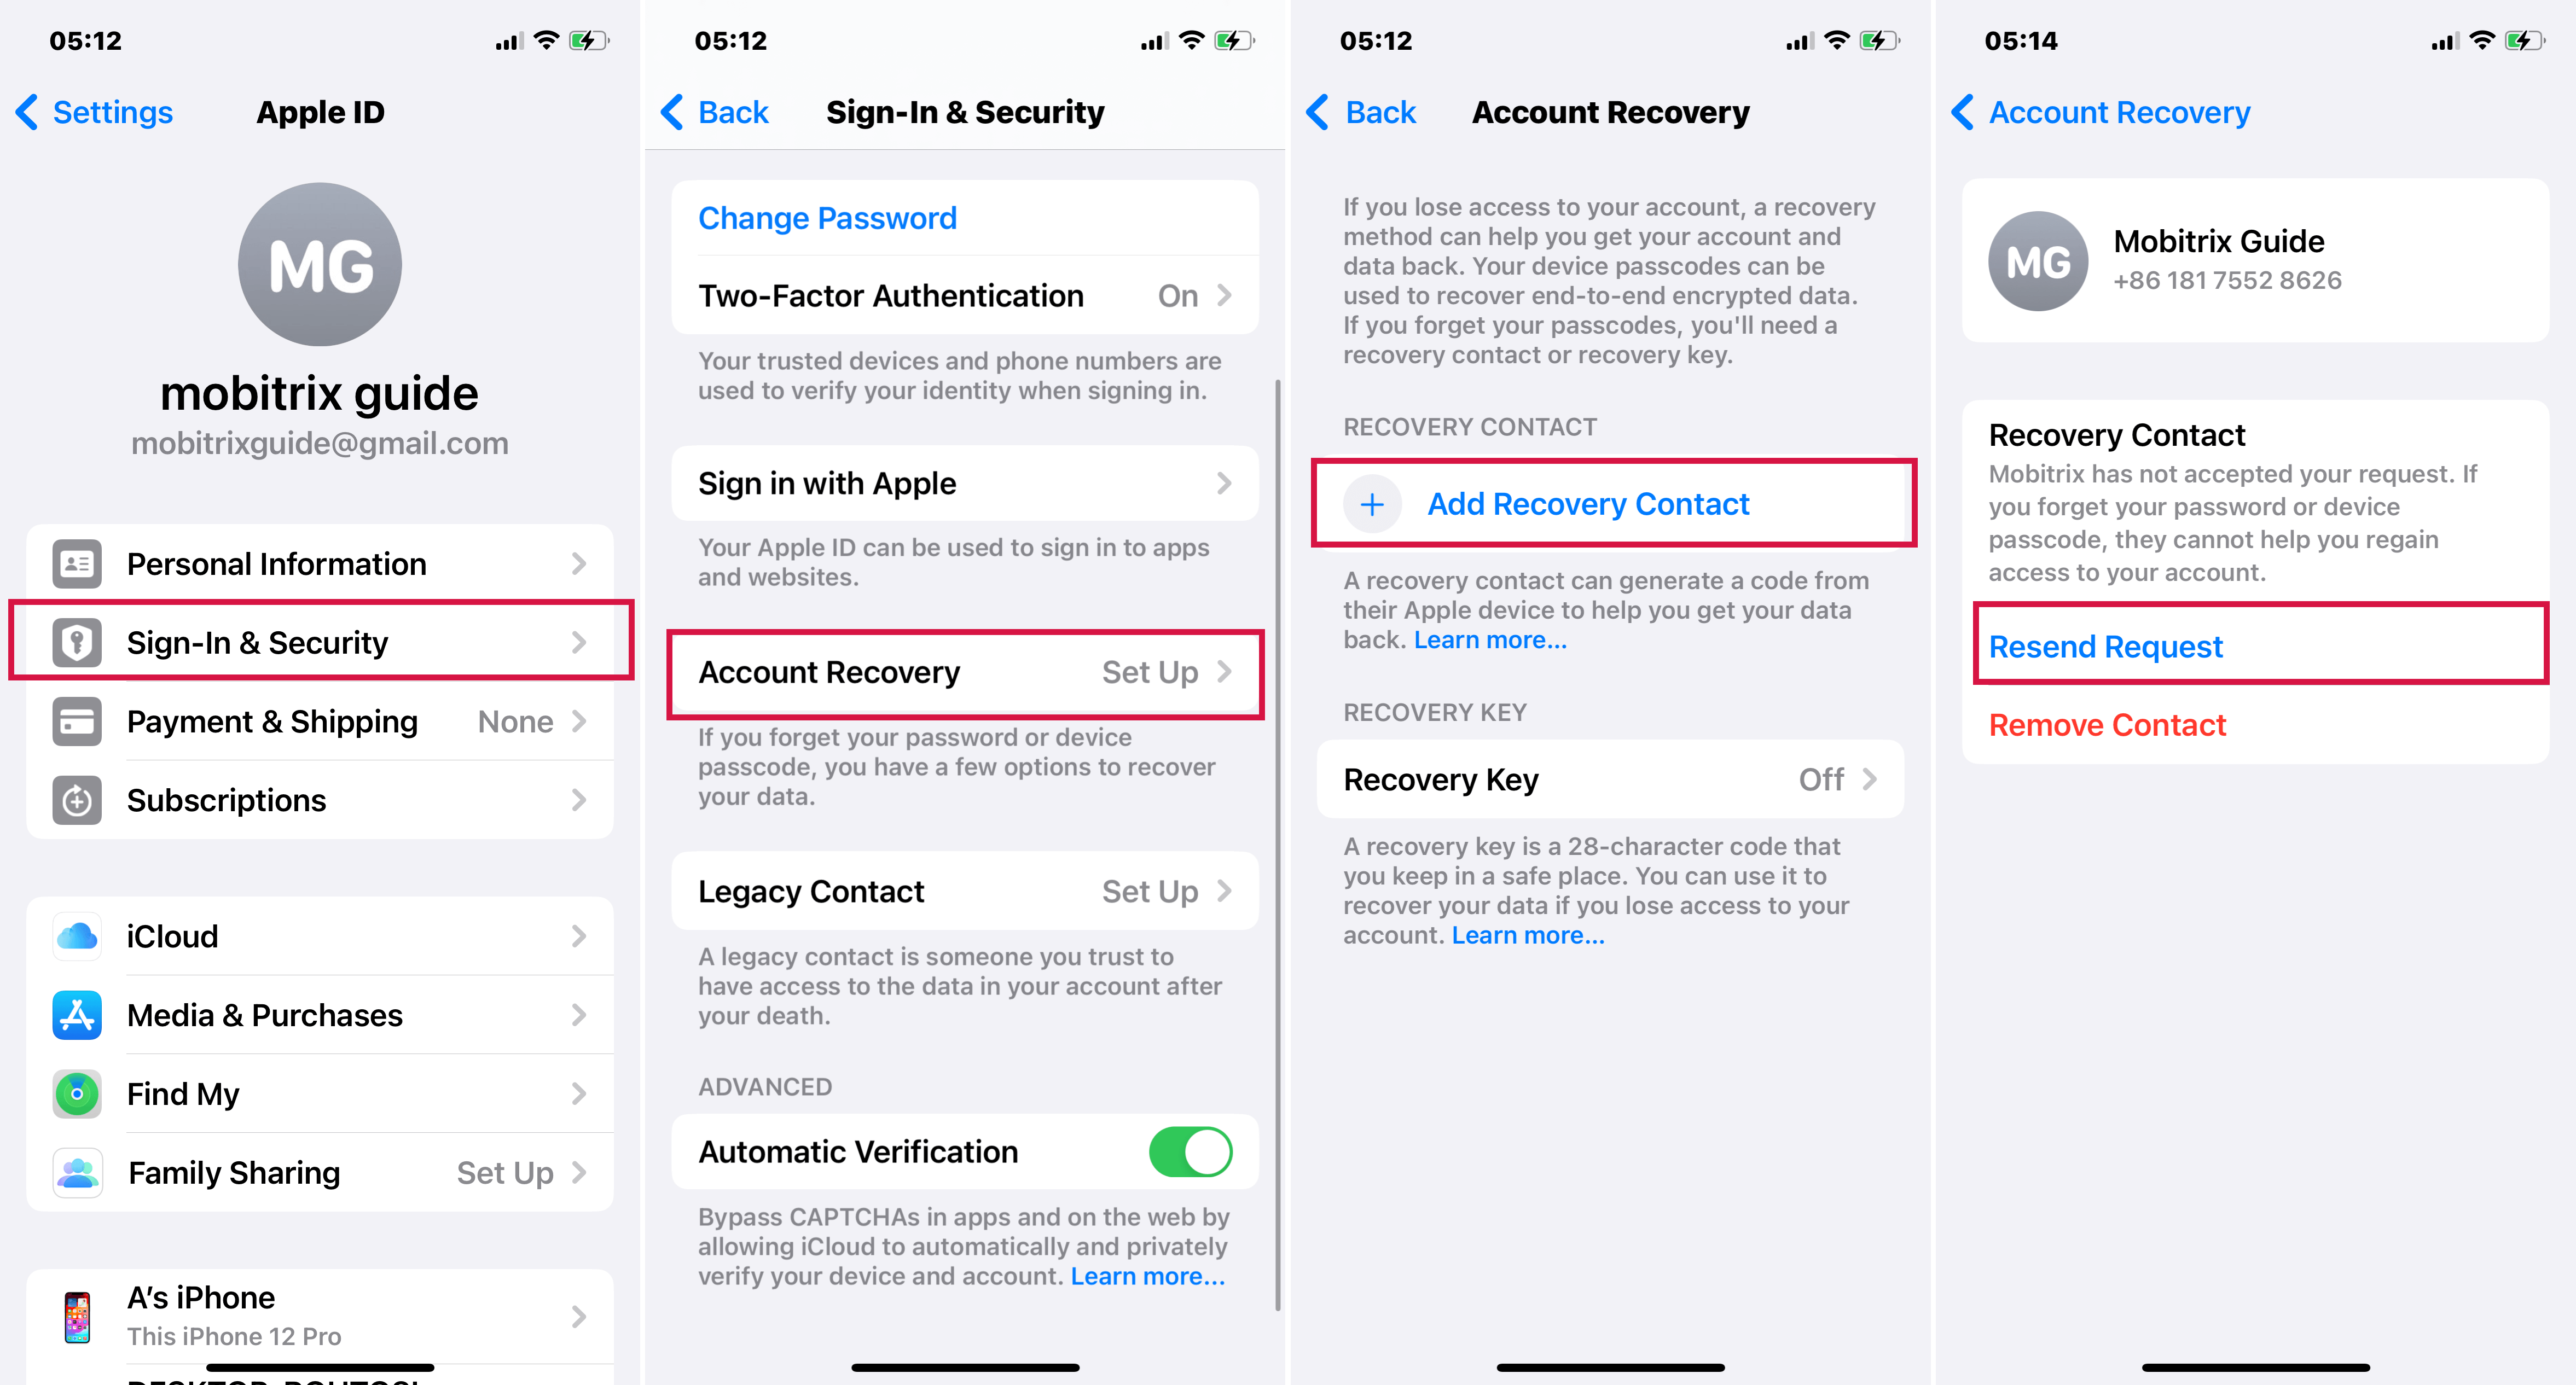 Add Recovery Contact on iPhone